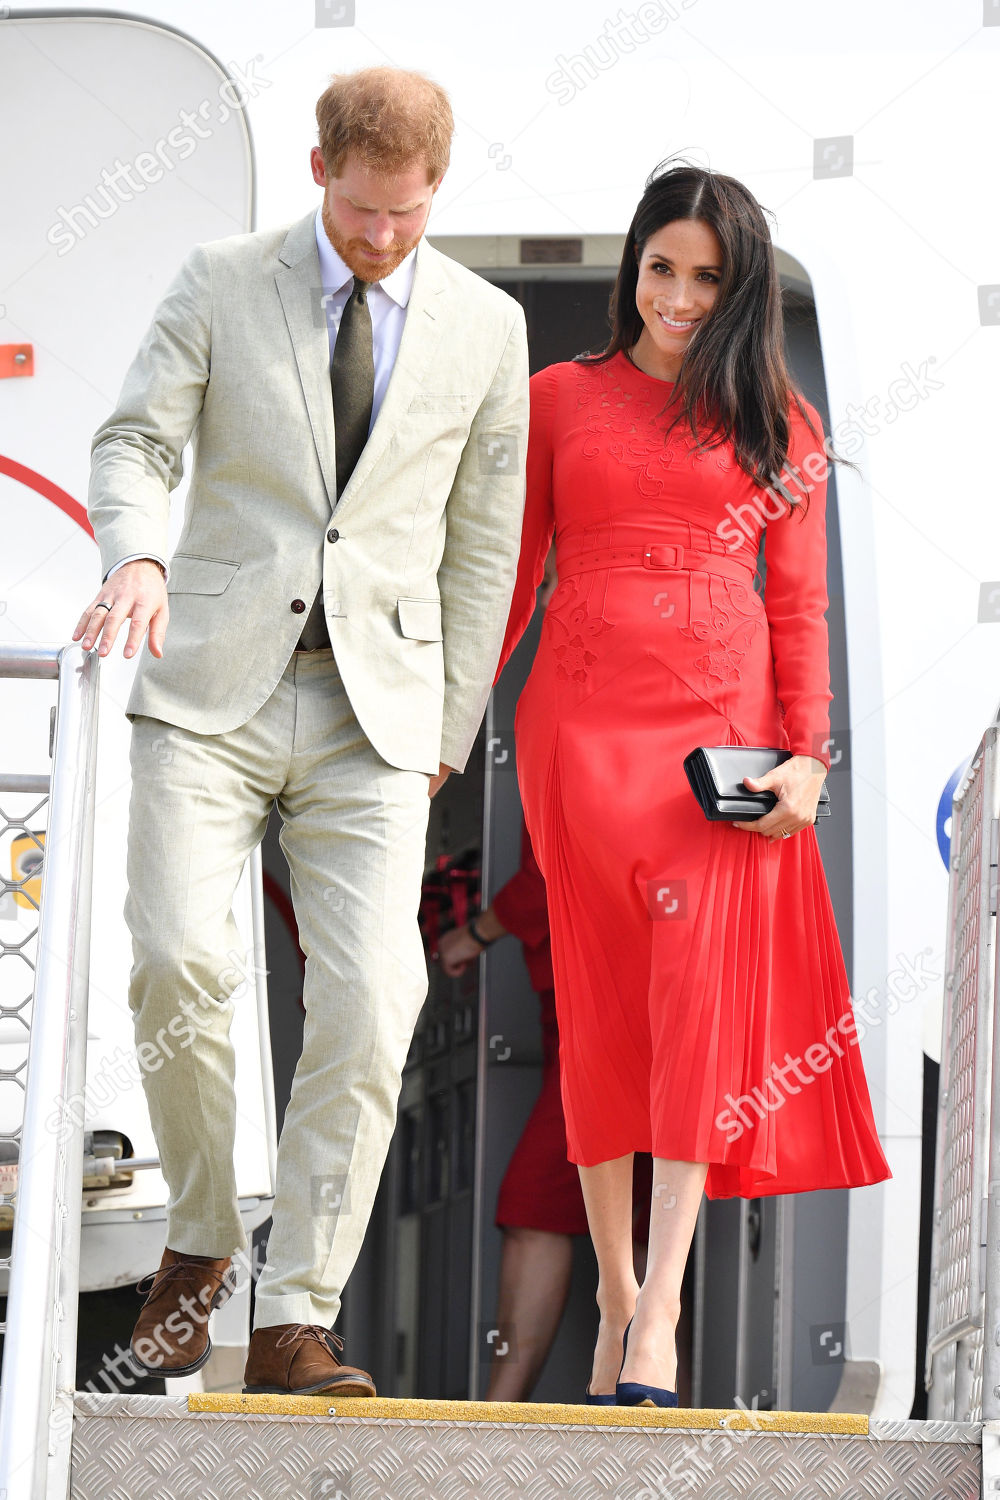 prince-harry-and-meghan-duchess-of-sussex-tour-of-tonga-shutterstock-editorial-9943917a.jpg